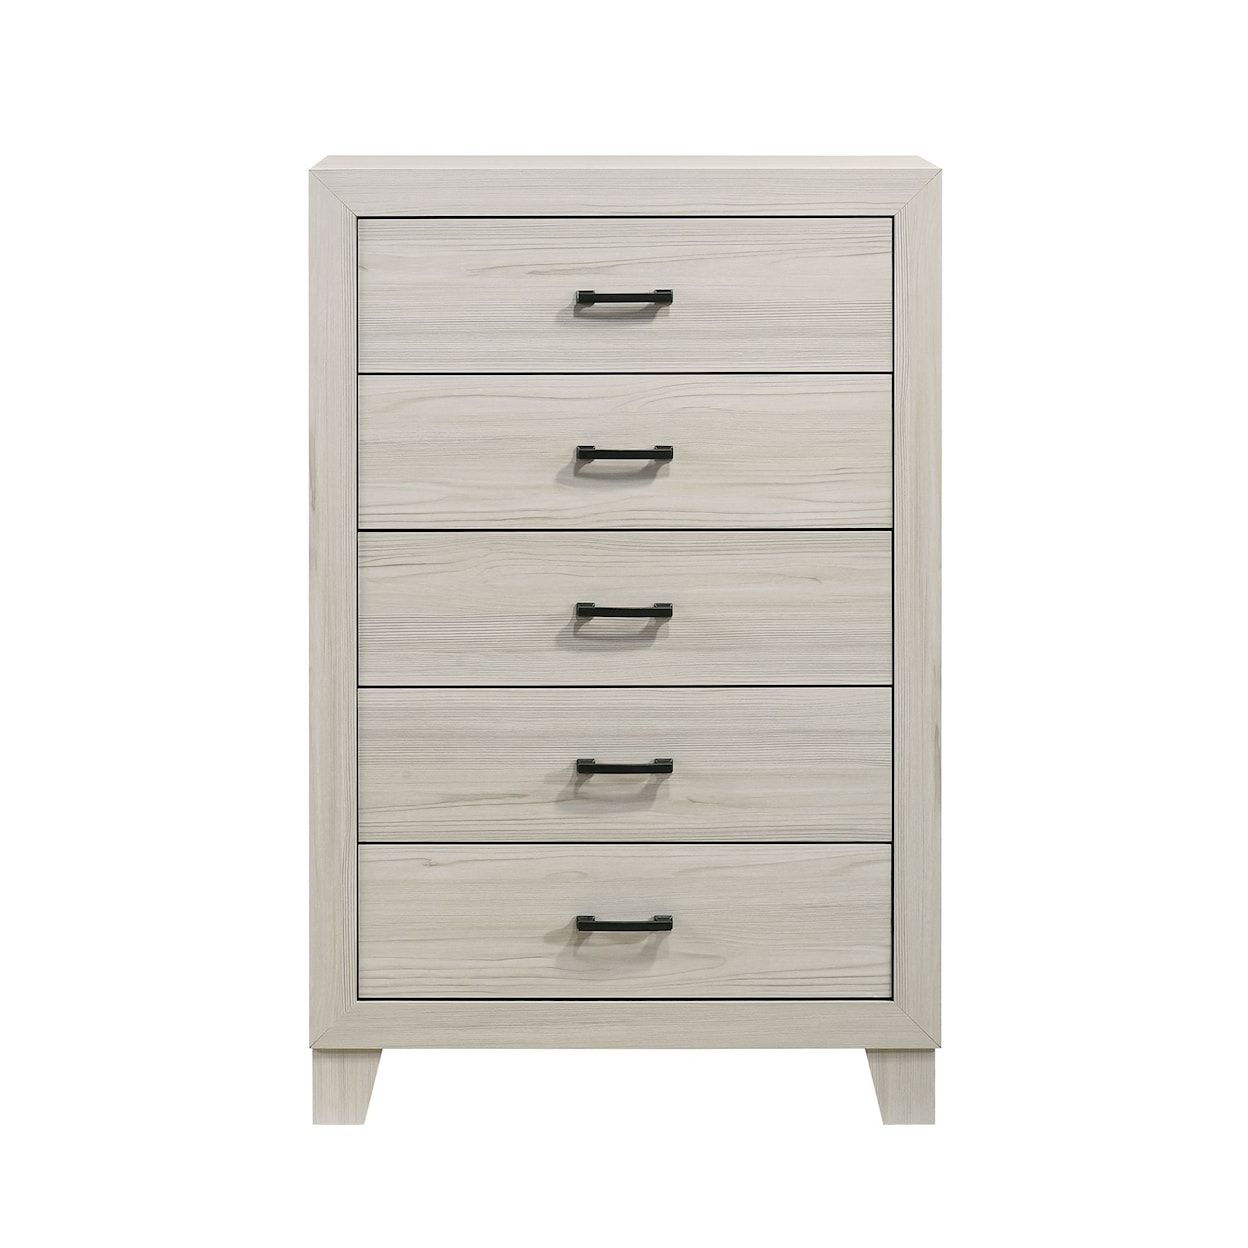 Elements Makayla Chest of Drawers